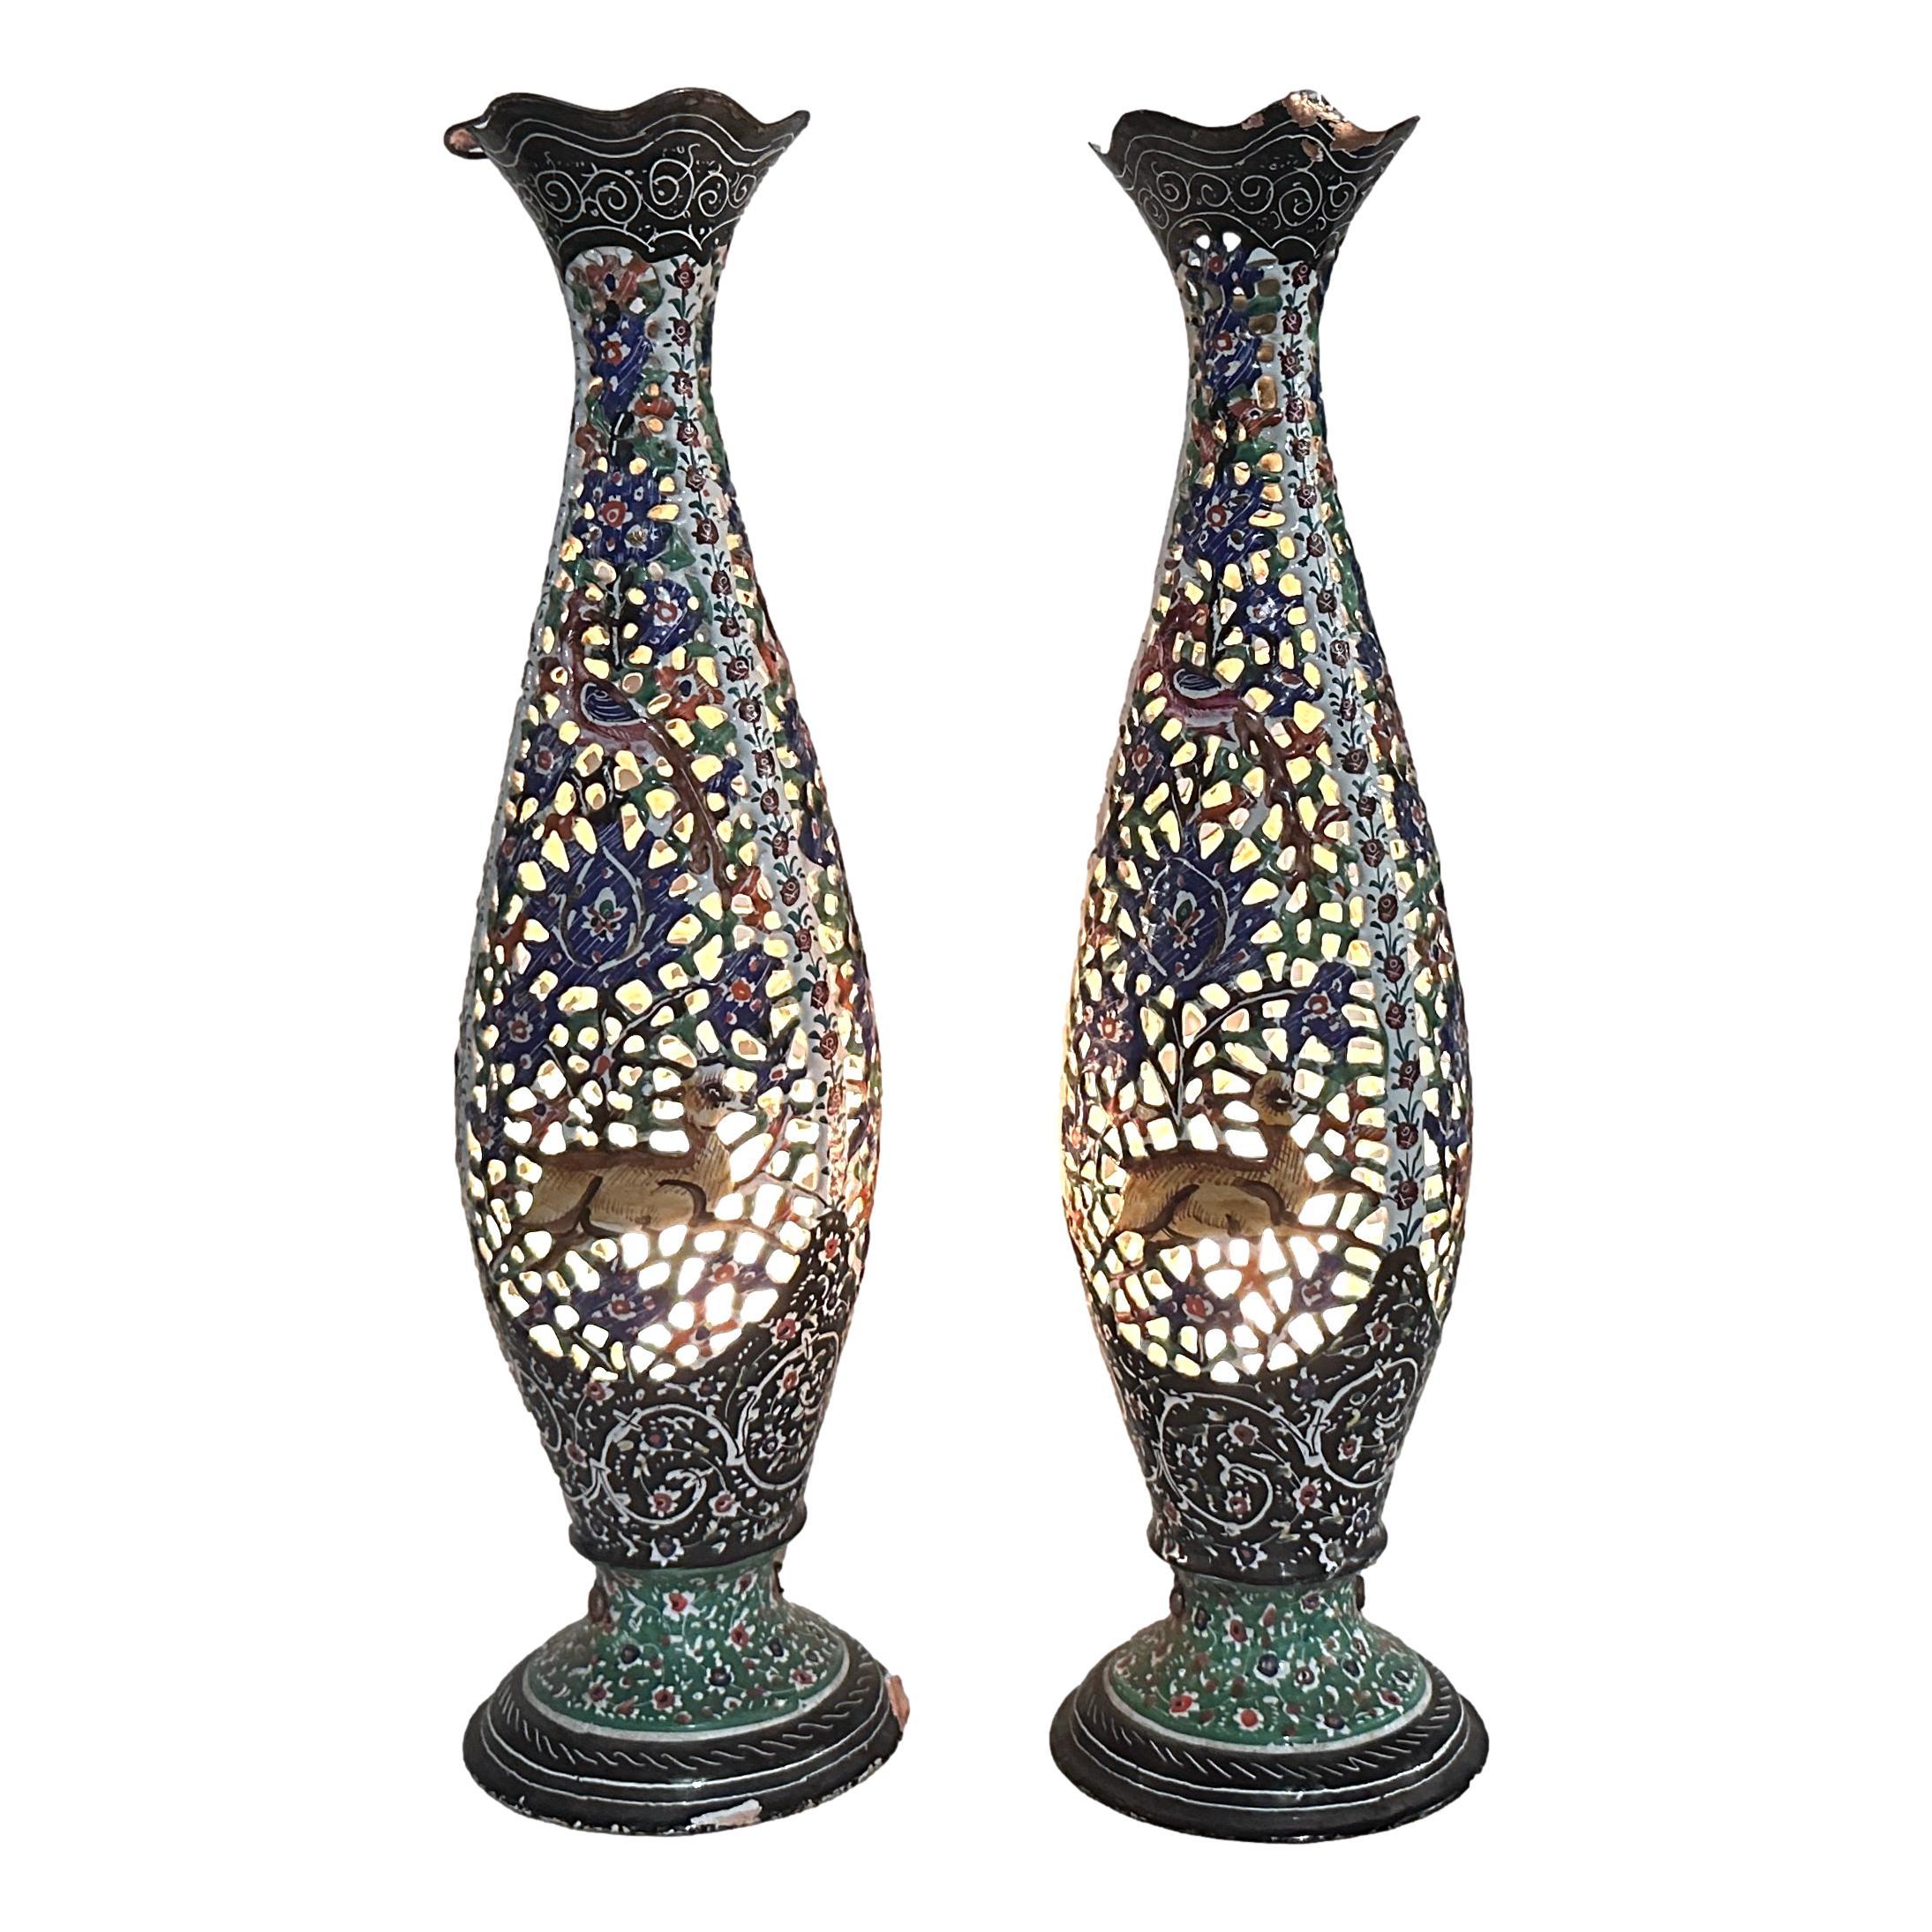 Pair of circa 1960’s Persian enamelled copper table lamps with interior light.

Measurements:
Height: 14″
Diameter: 3.75″